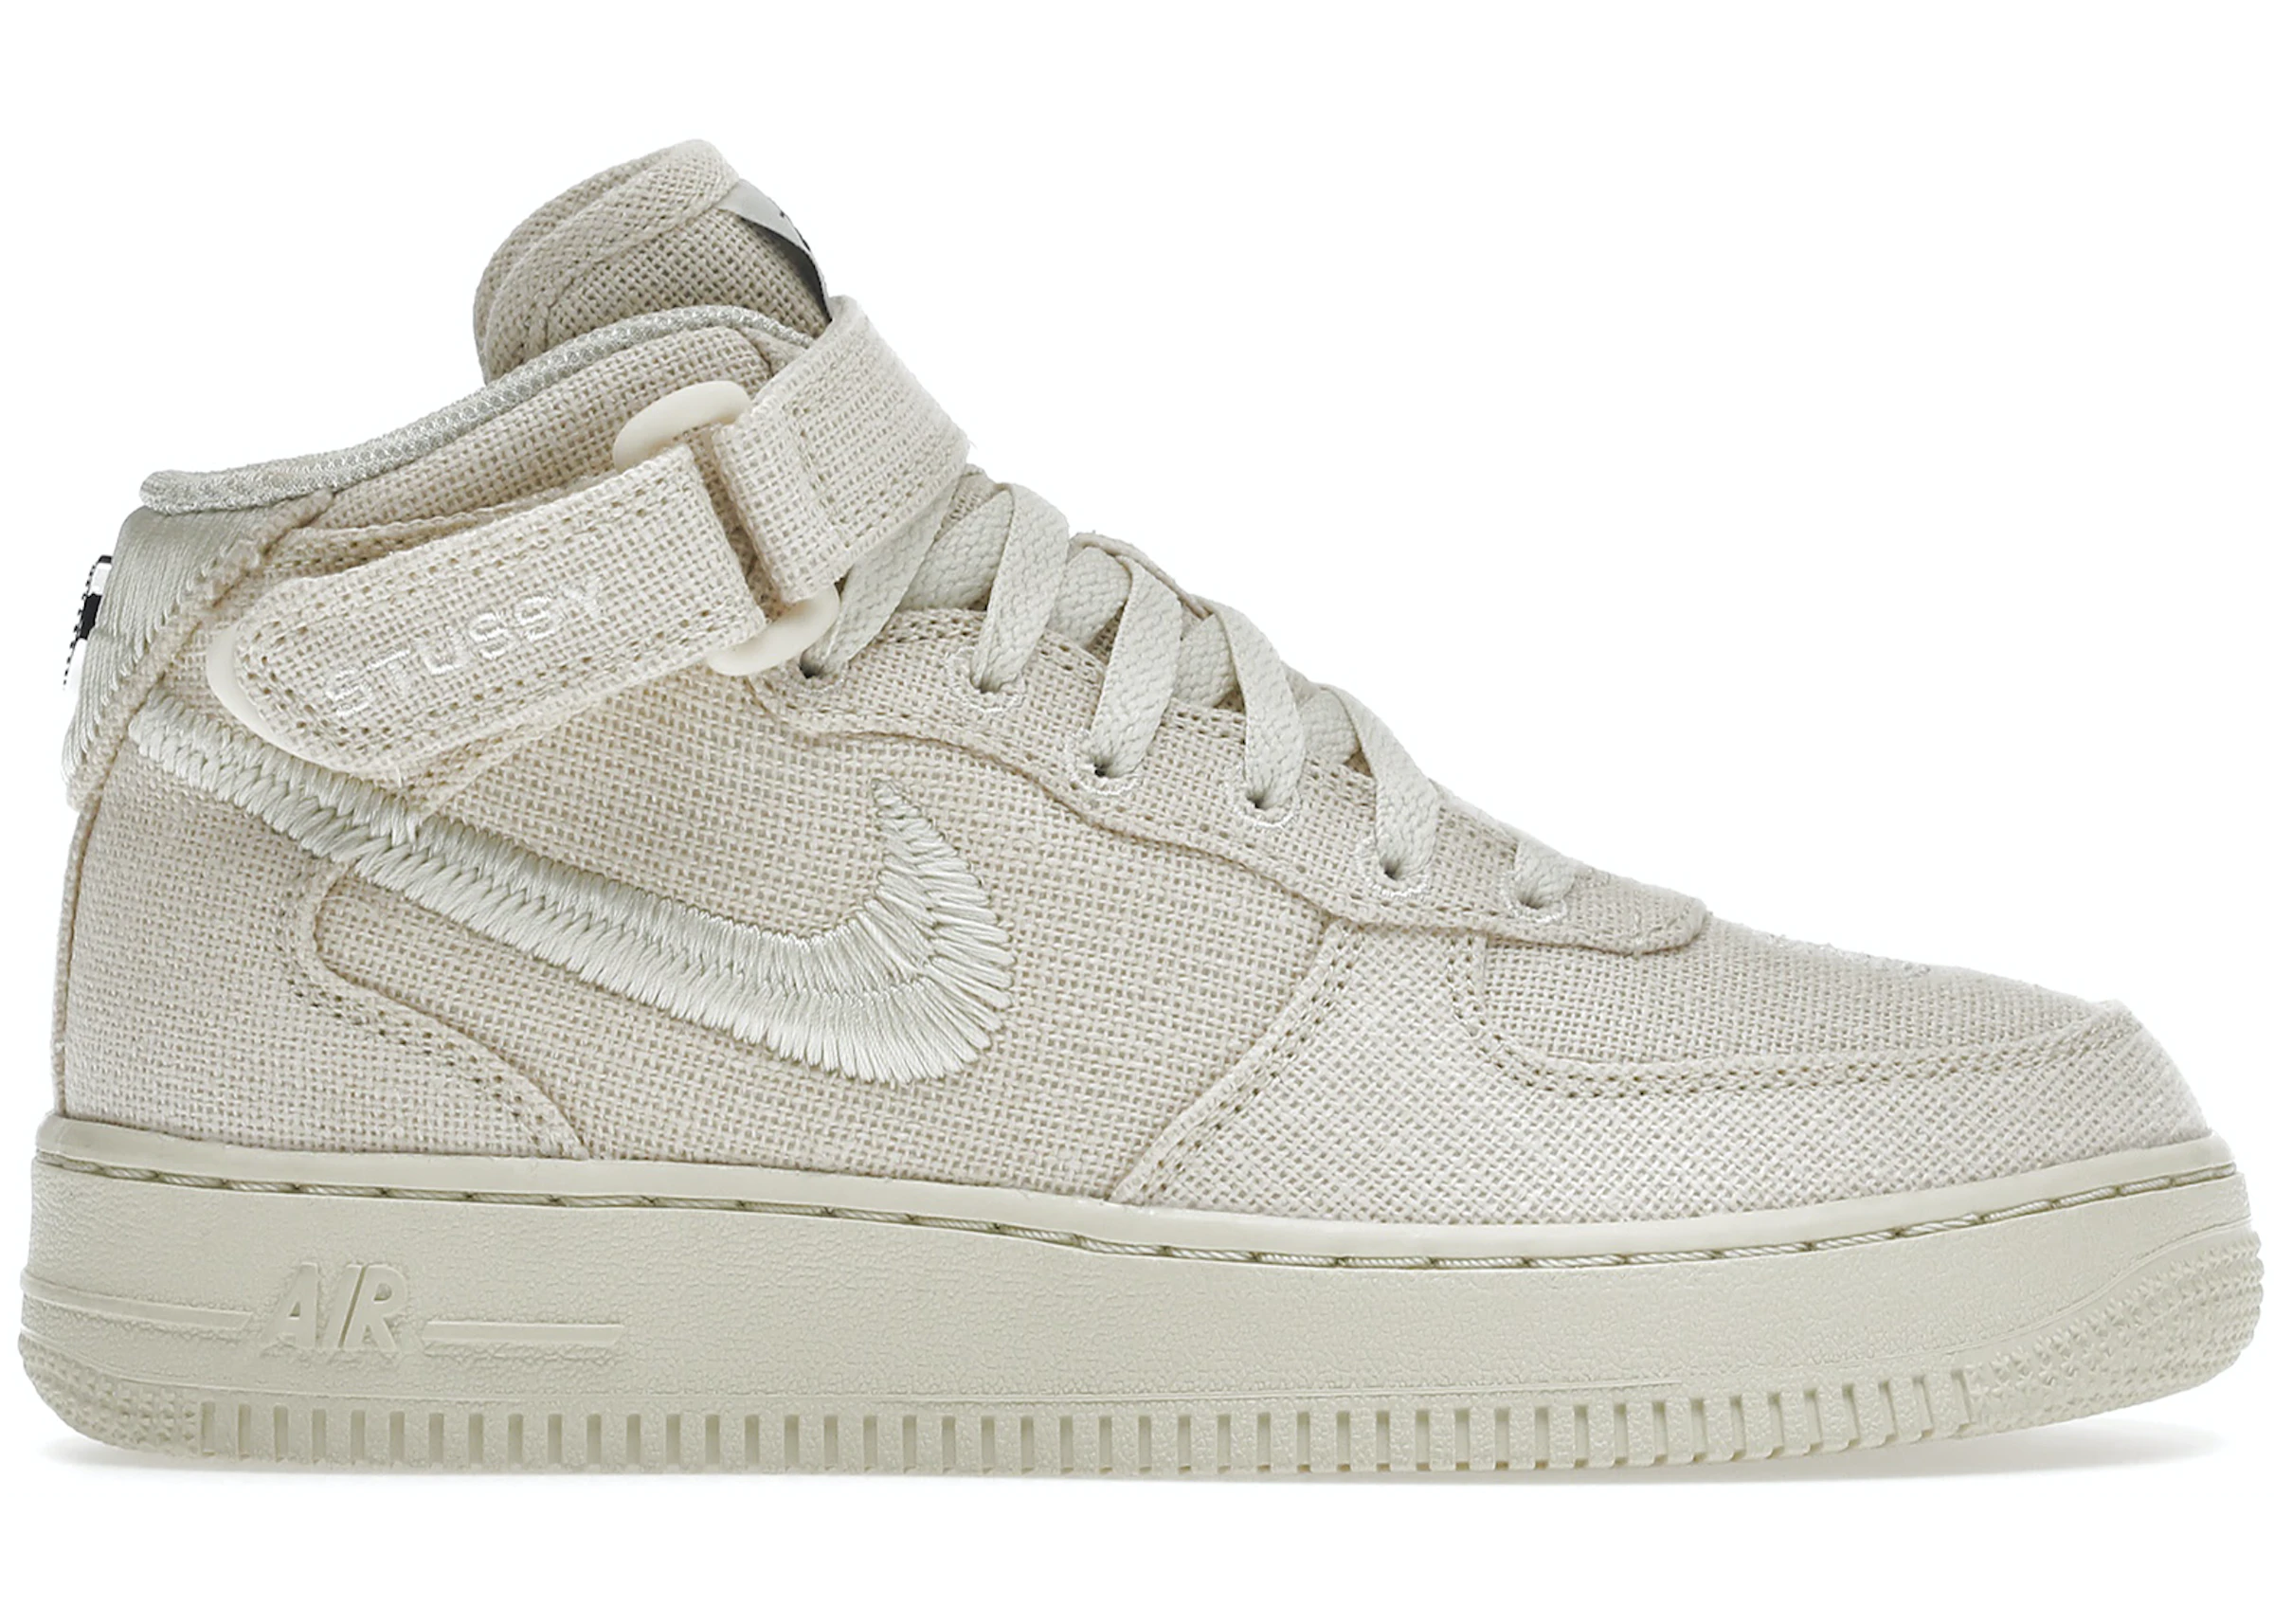 Buy Nike para noise af1 Air Force Shoes & New Sneakers - StockX